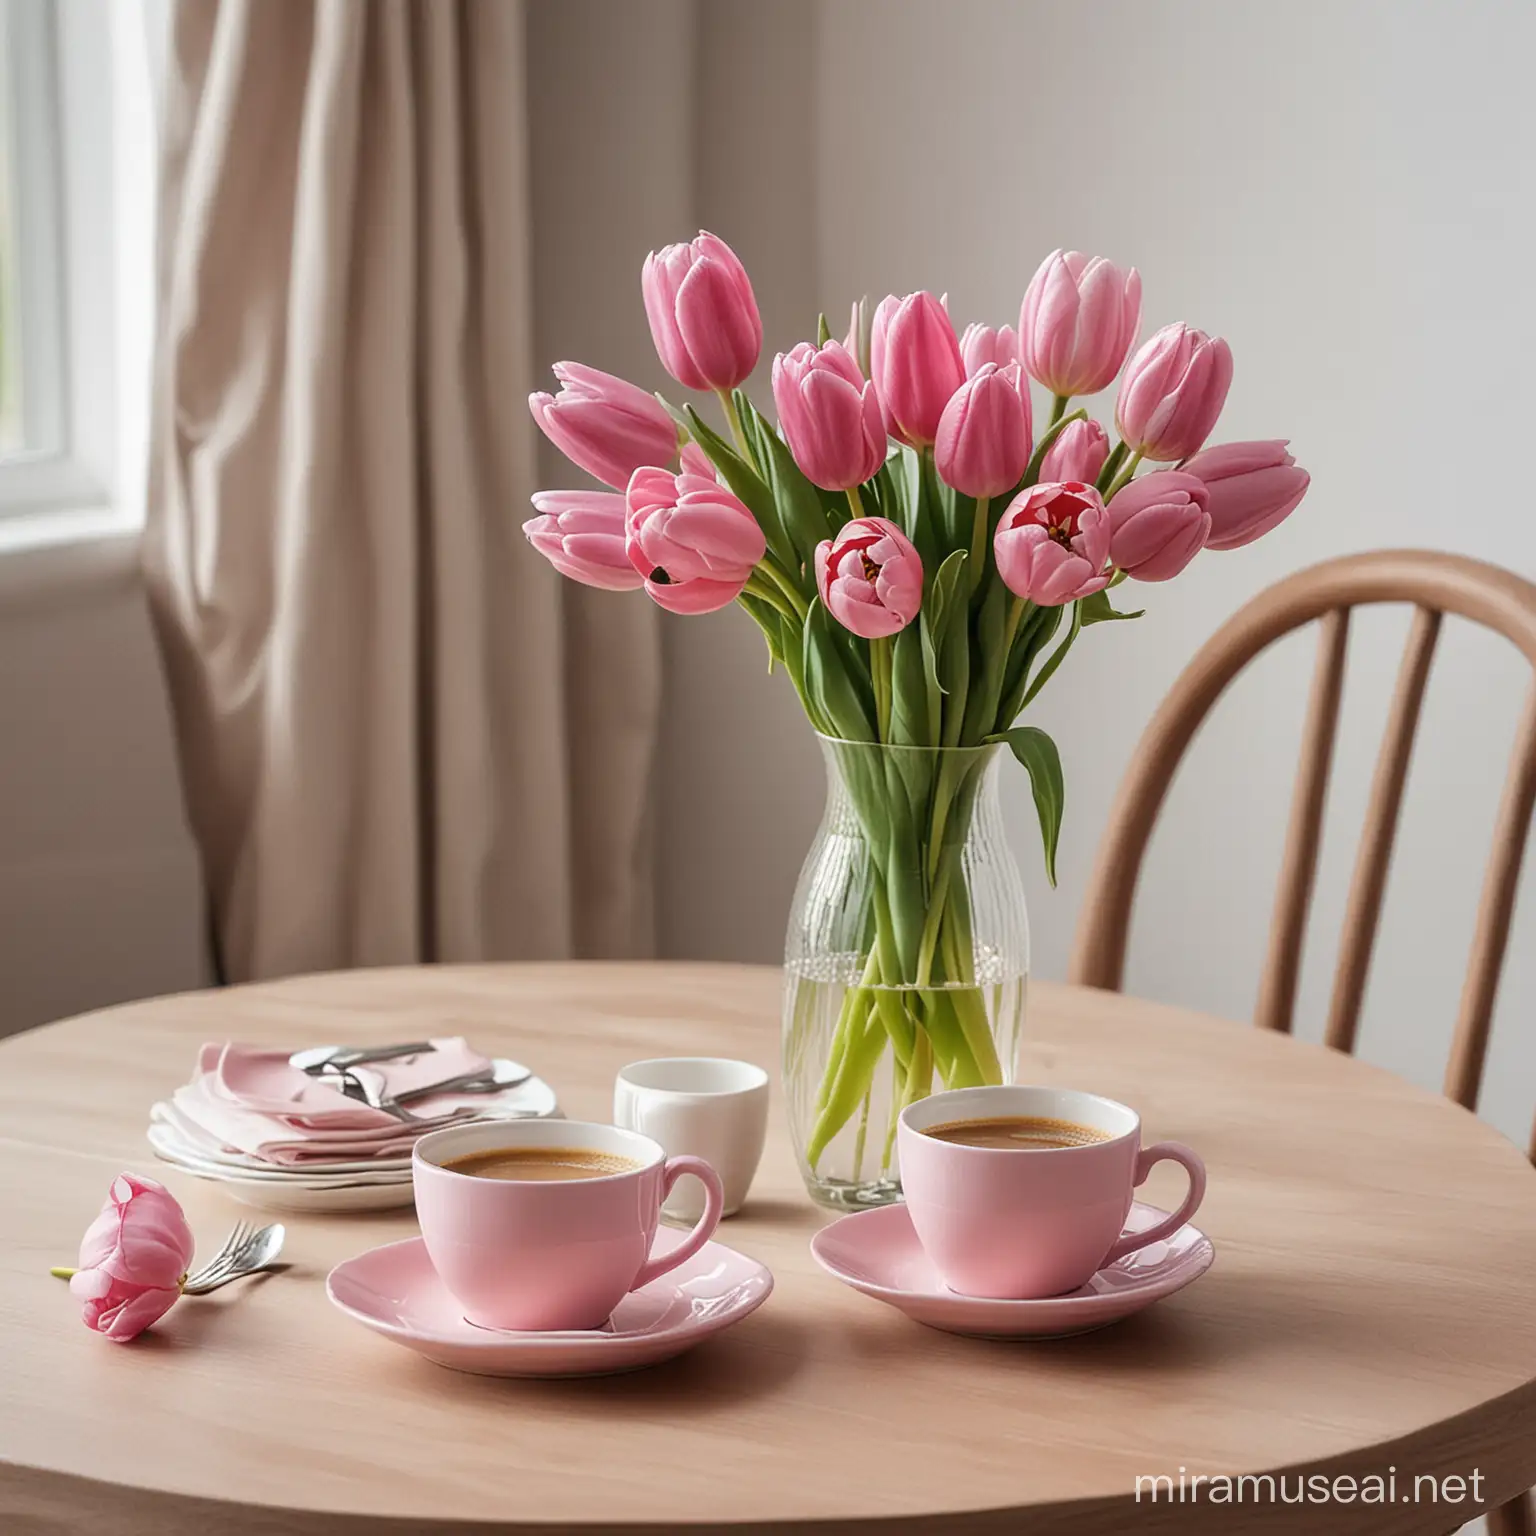 Table Setting with Pink Coffee Cups and Tulip Vase